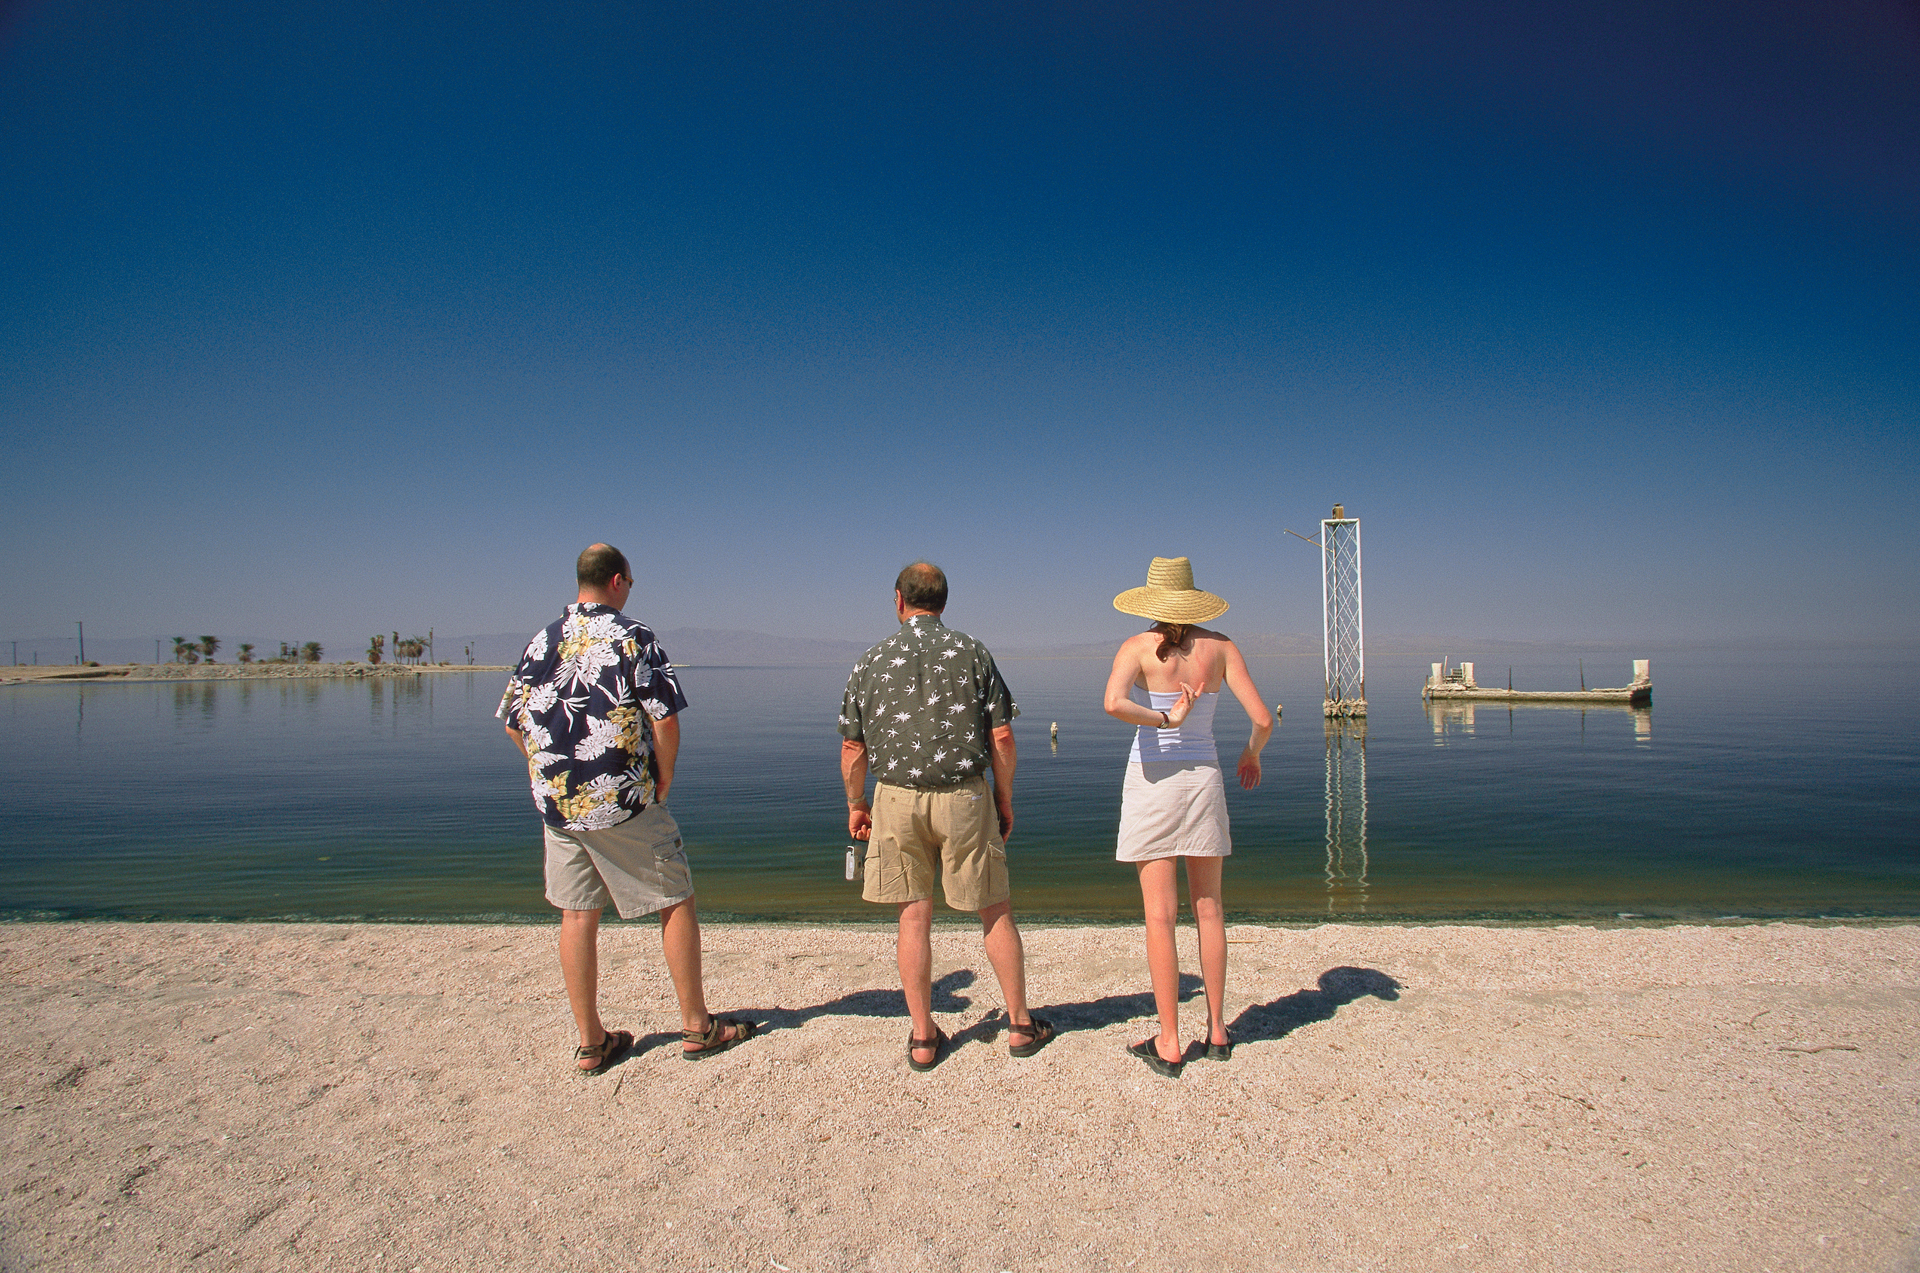  Once a lure for movie stars in the 1950's and 60’s, the Salton Sea was expected to become the next Las Vegas. Now tourists can only imagine its former splendor.  Salton City  